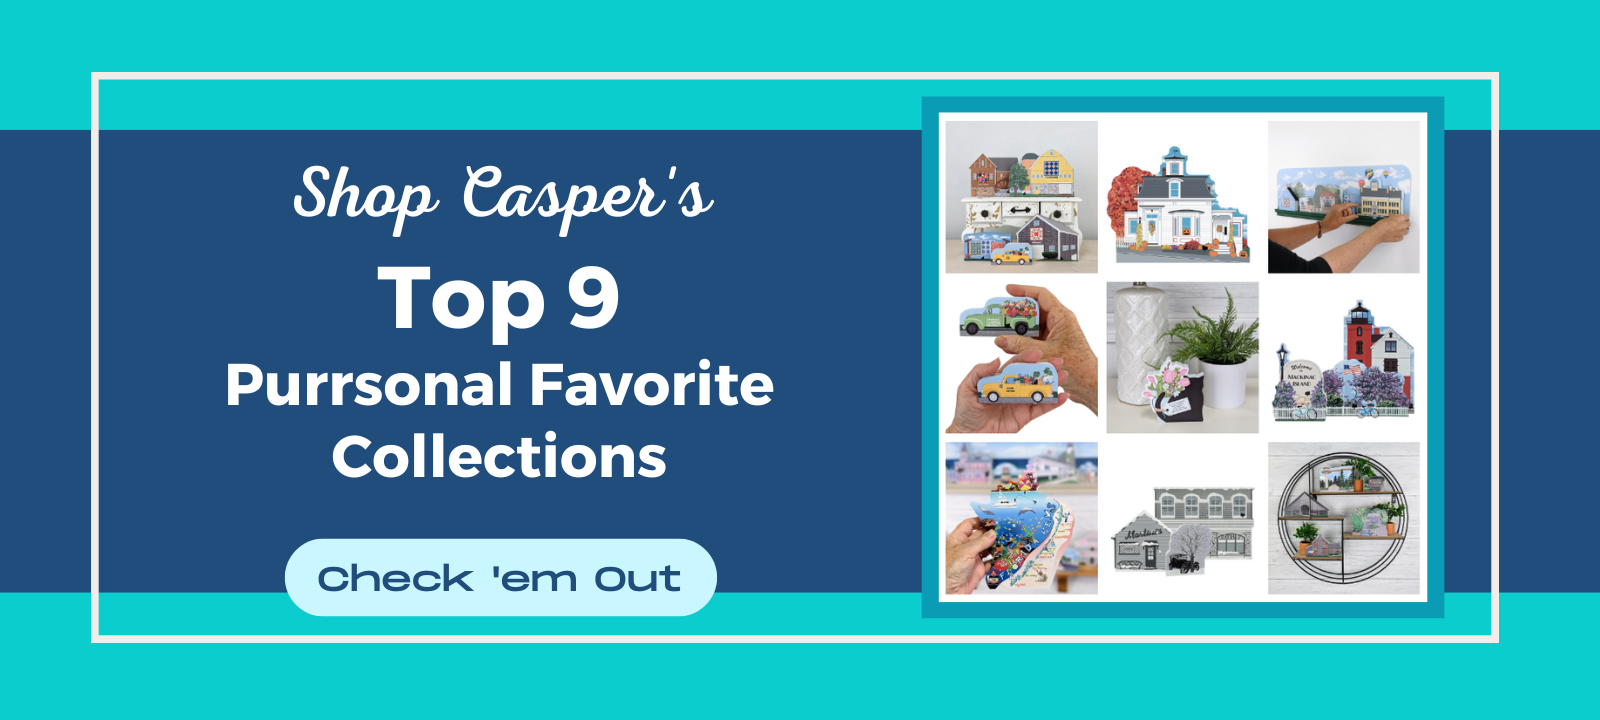 shop our Top 9 popular collections